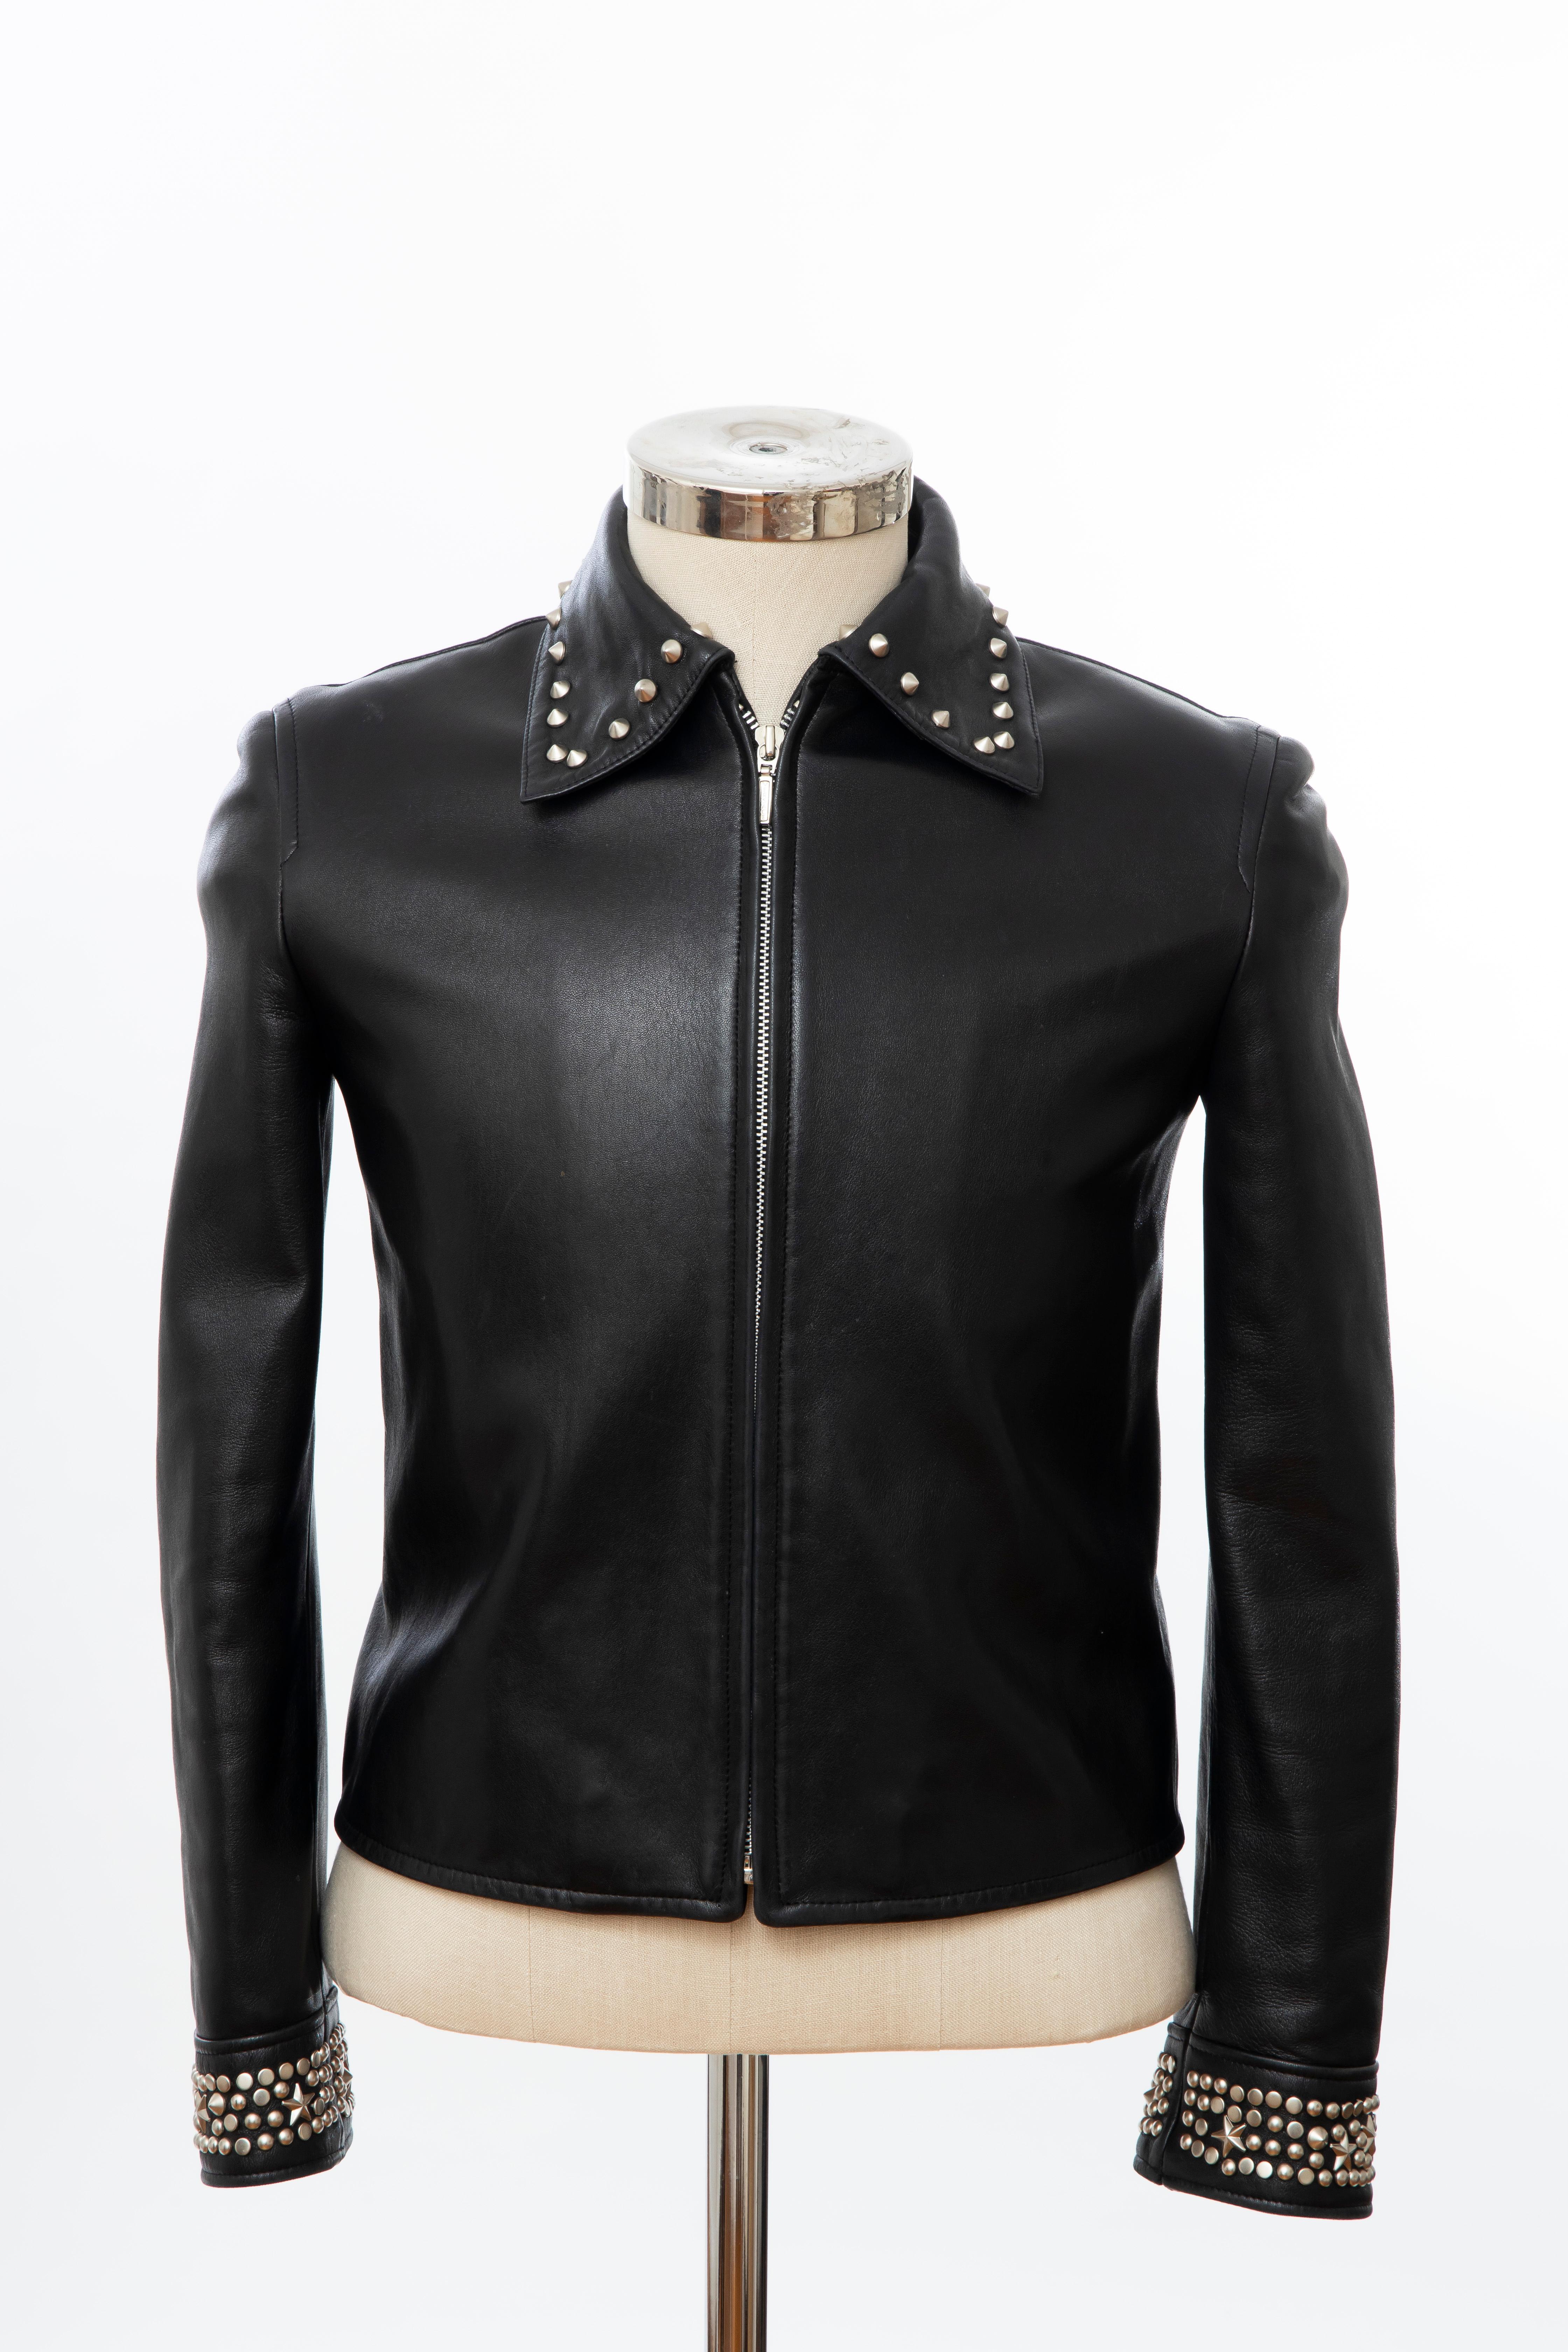 Gianni Versace Black Leather Jacket Pewter Stud Collar & Cuffs,  Circa: 1990's In Excellent Condition For Sale In Cincinnati, OH